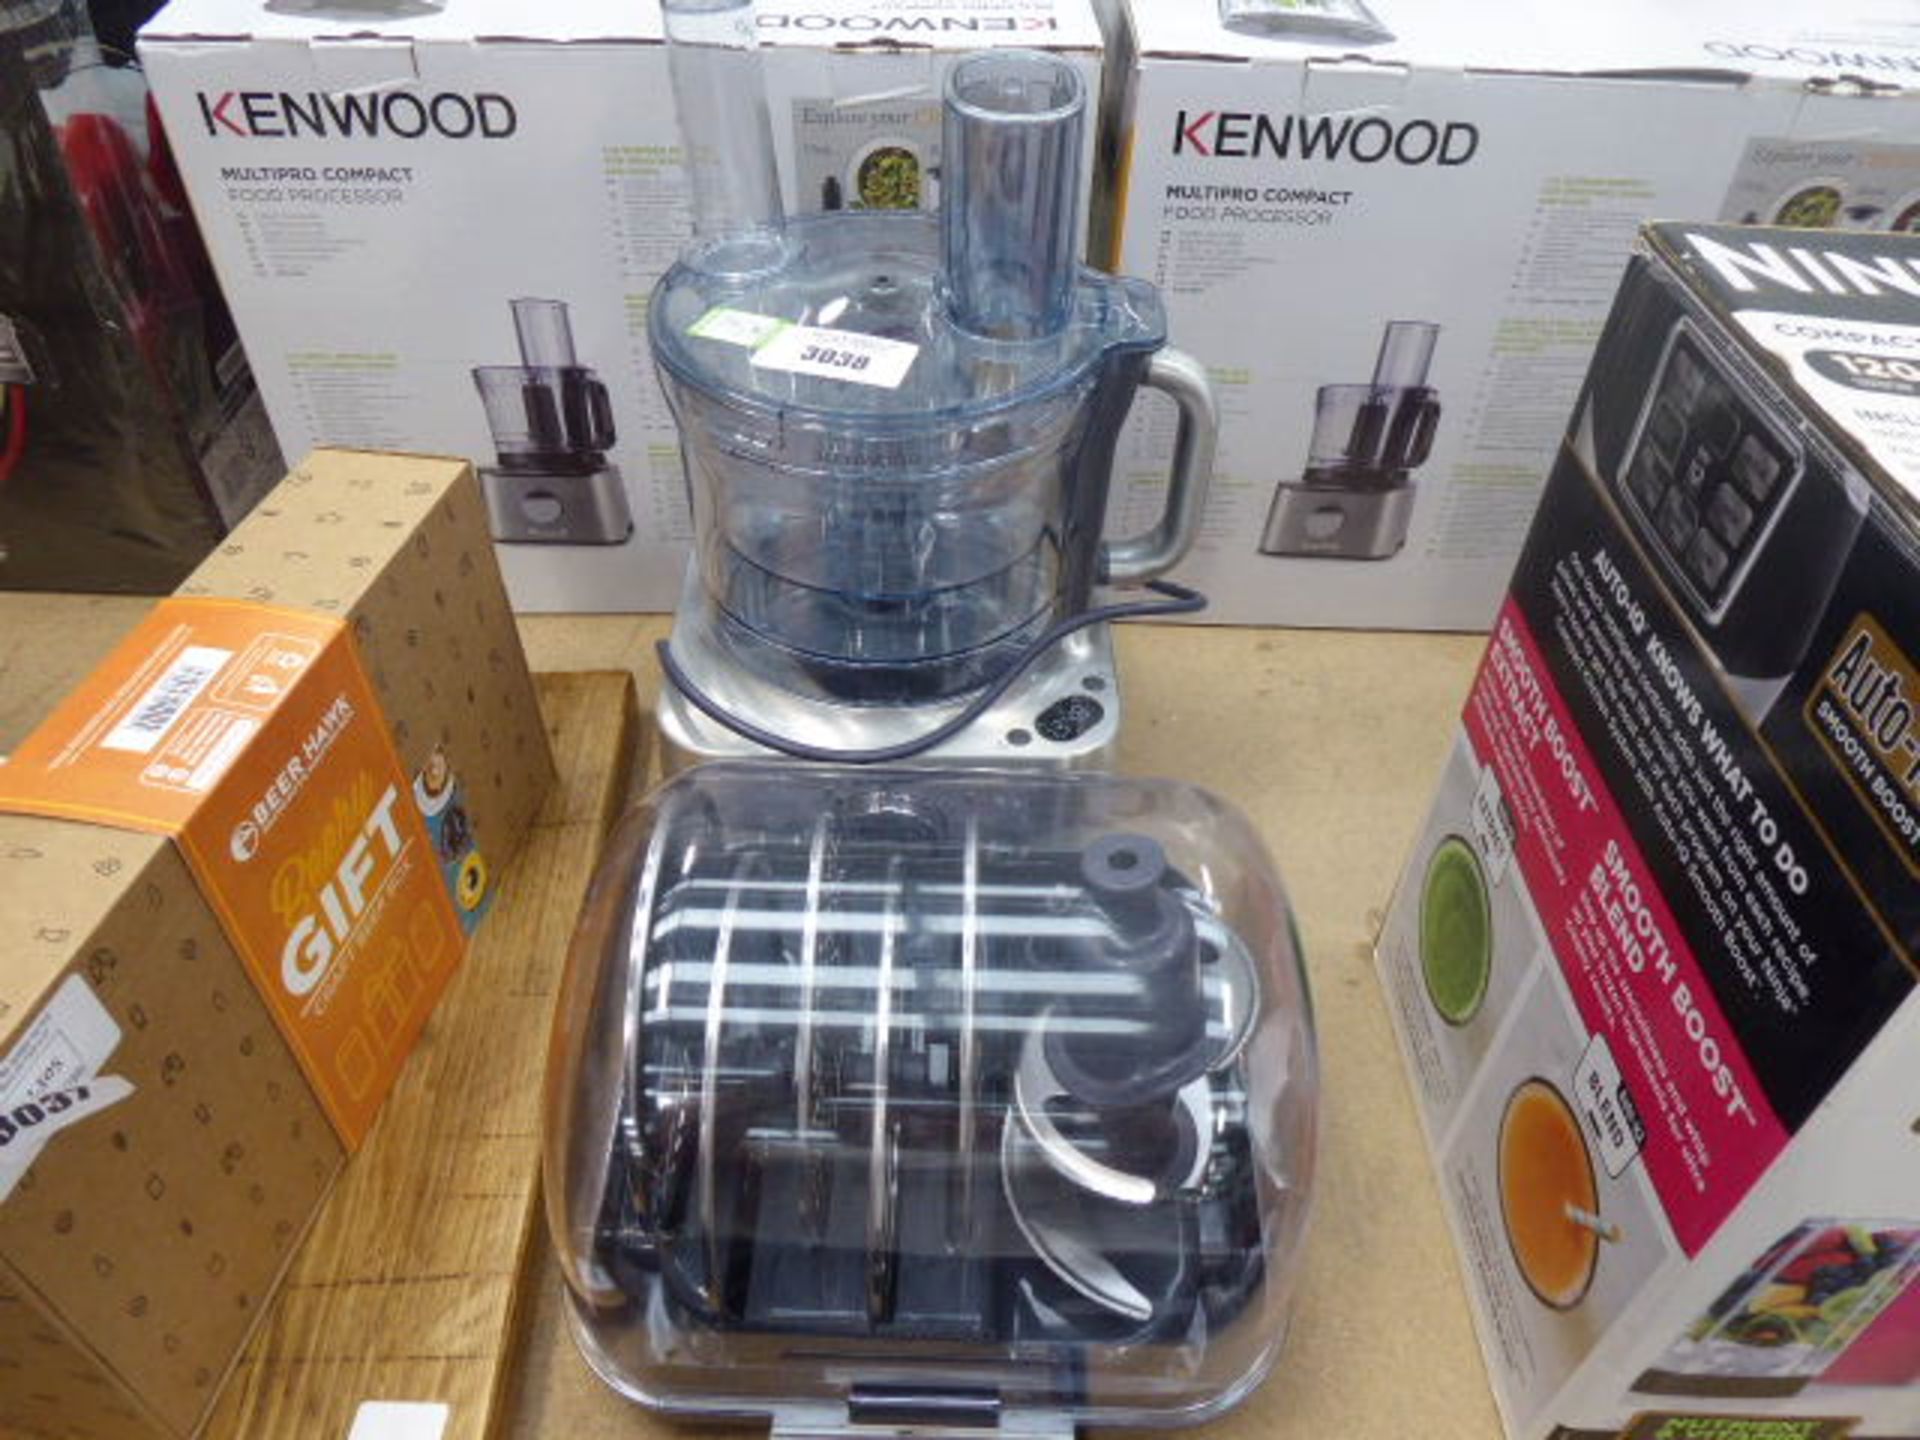 Kenwood multi pro mixer with attachments